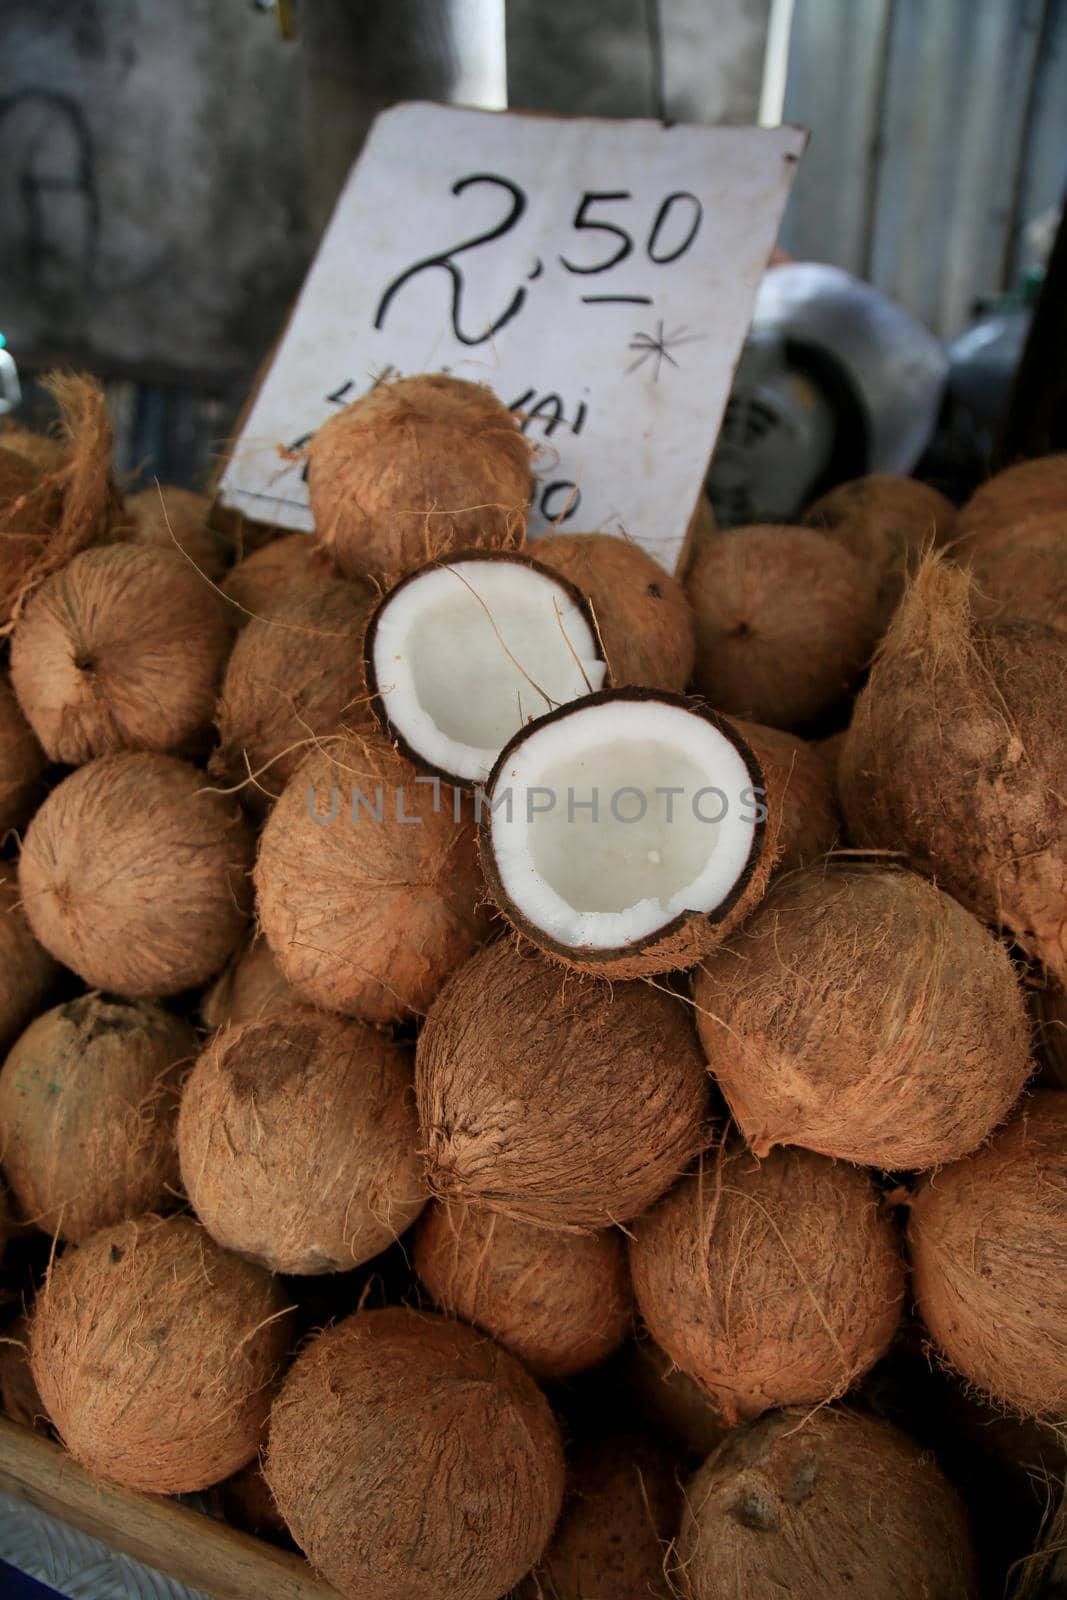 salvador, bahia, brazil - january 27, 2021: broken dry coconut is seen for sale at the fair in japan, in the Liberdade neighborhood in the city of Salvador.